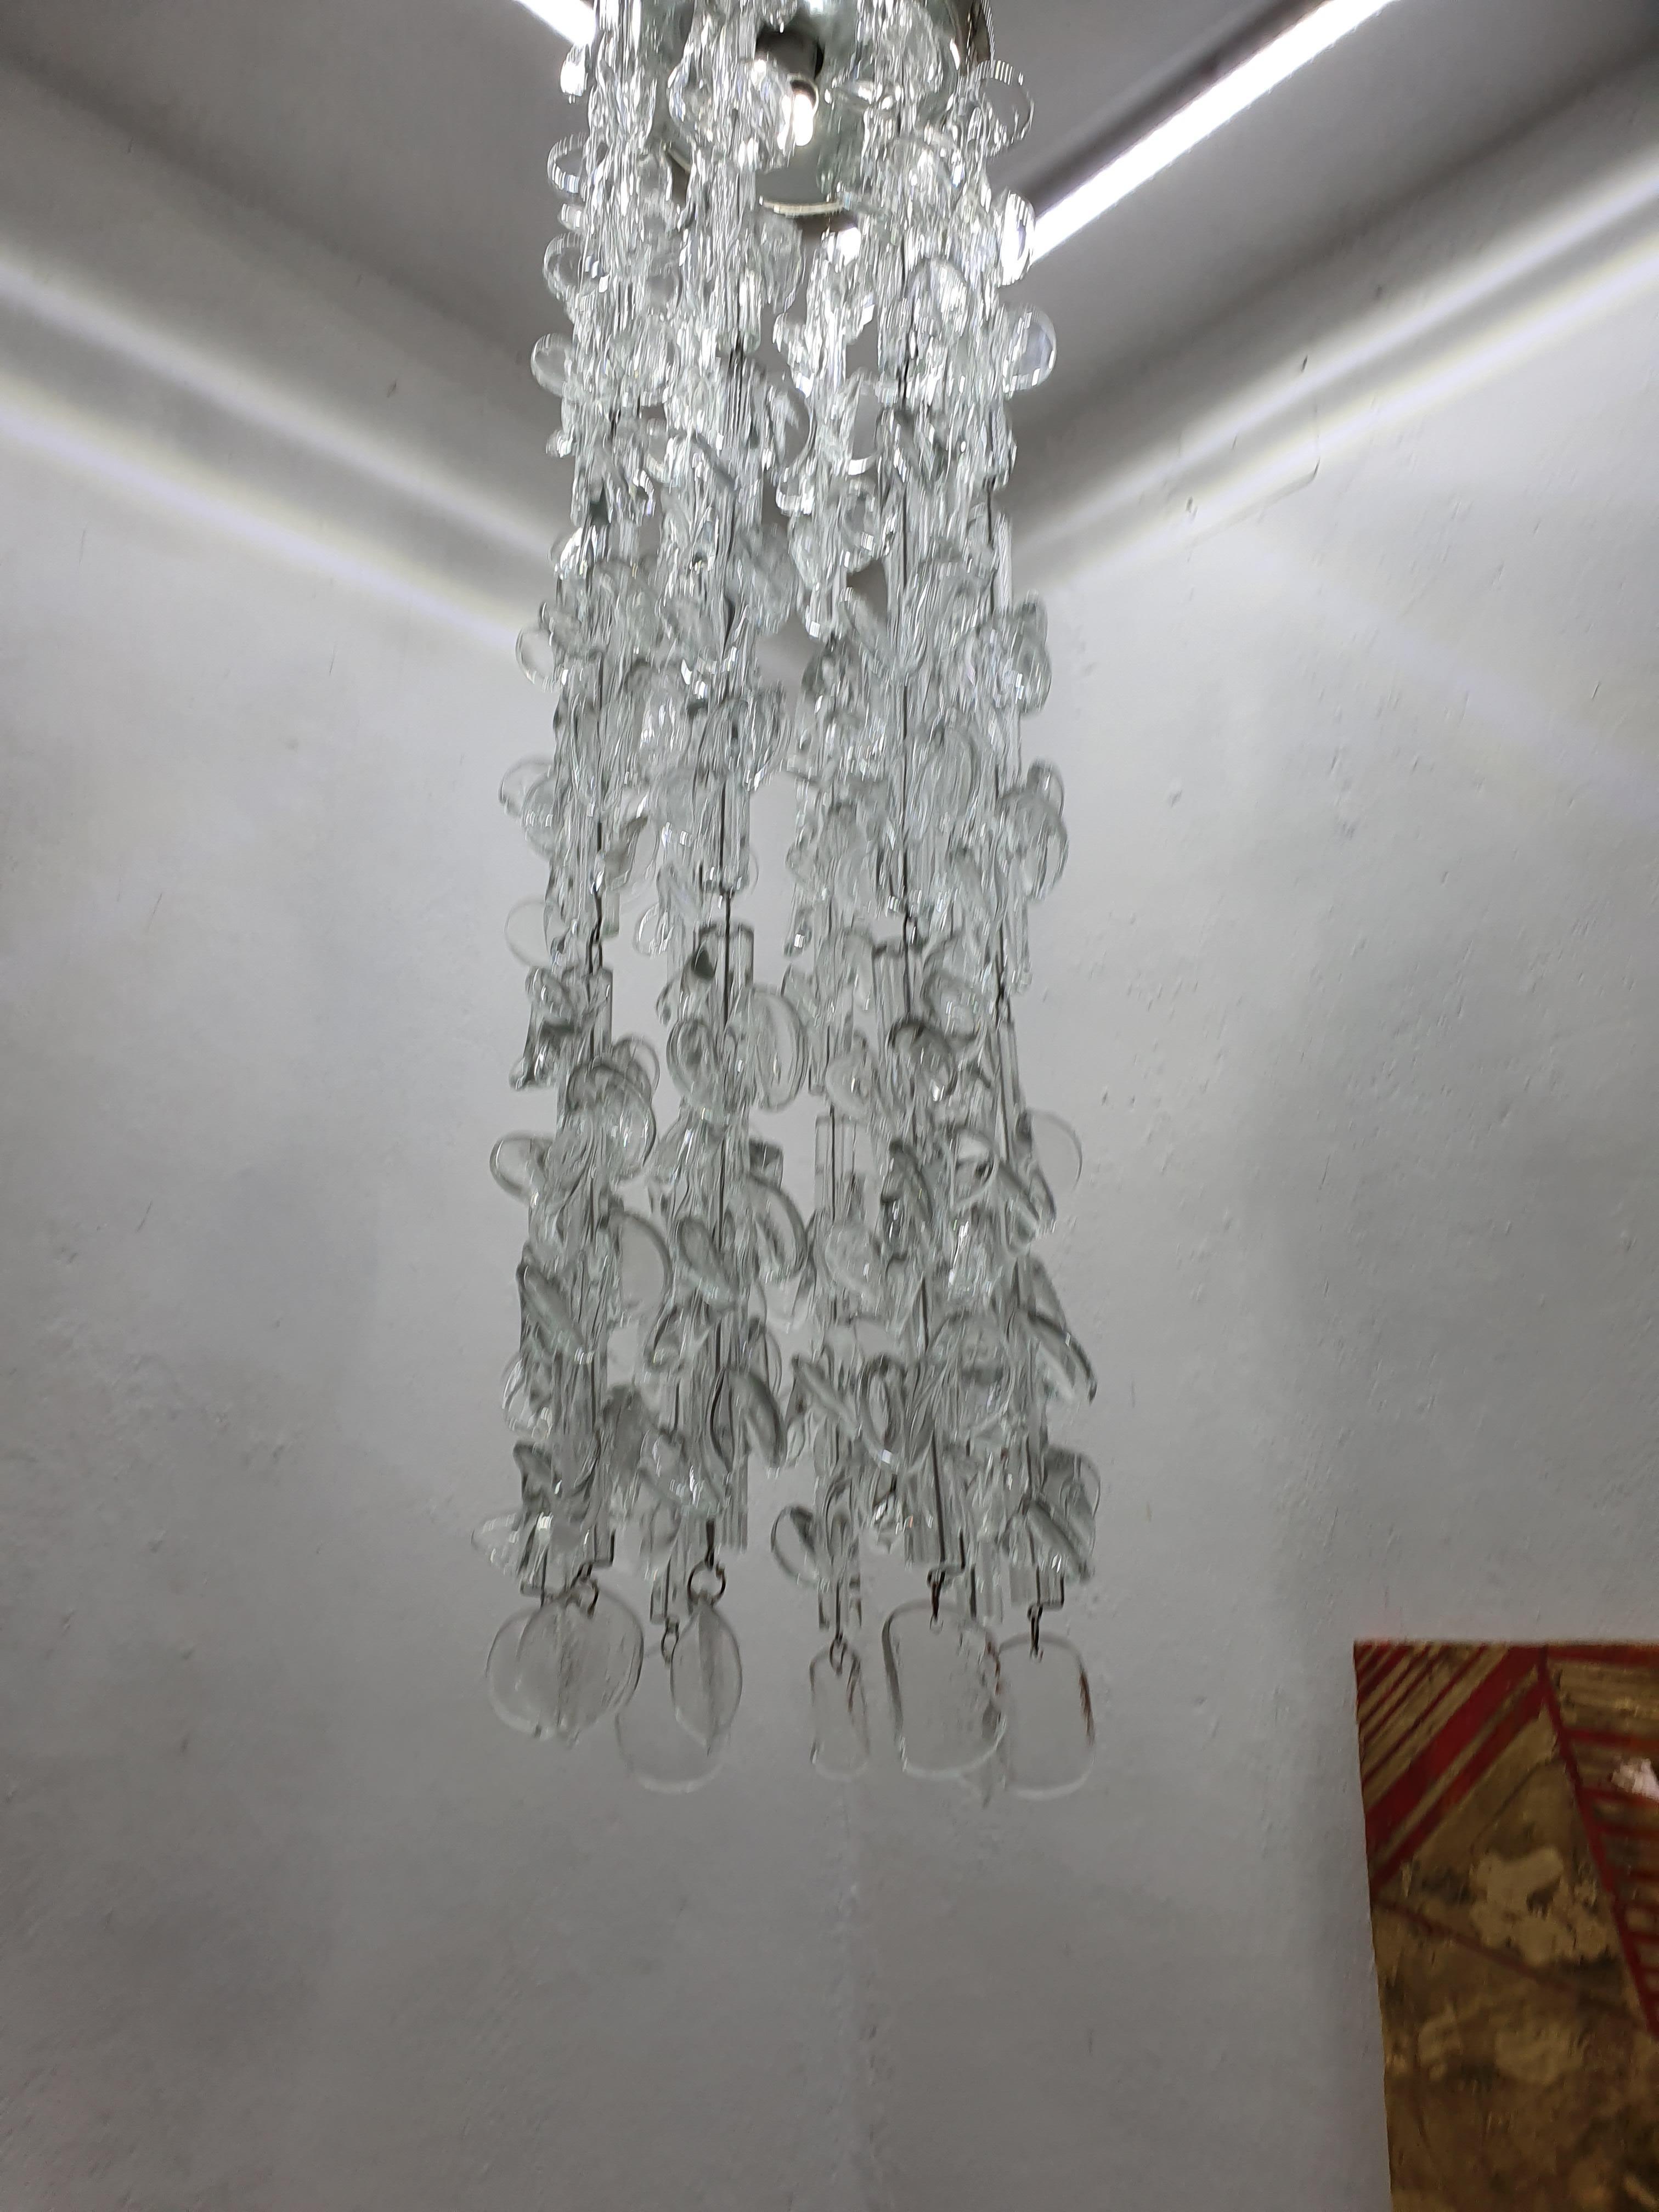 Mid-Century Modern Chandelier by Guisetti for Barovier & Toso, 1970s, Murano In Good Condition For Sale In Merida, Yucatan